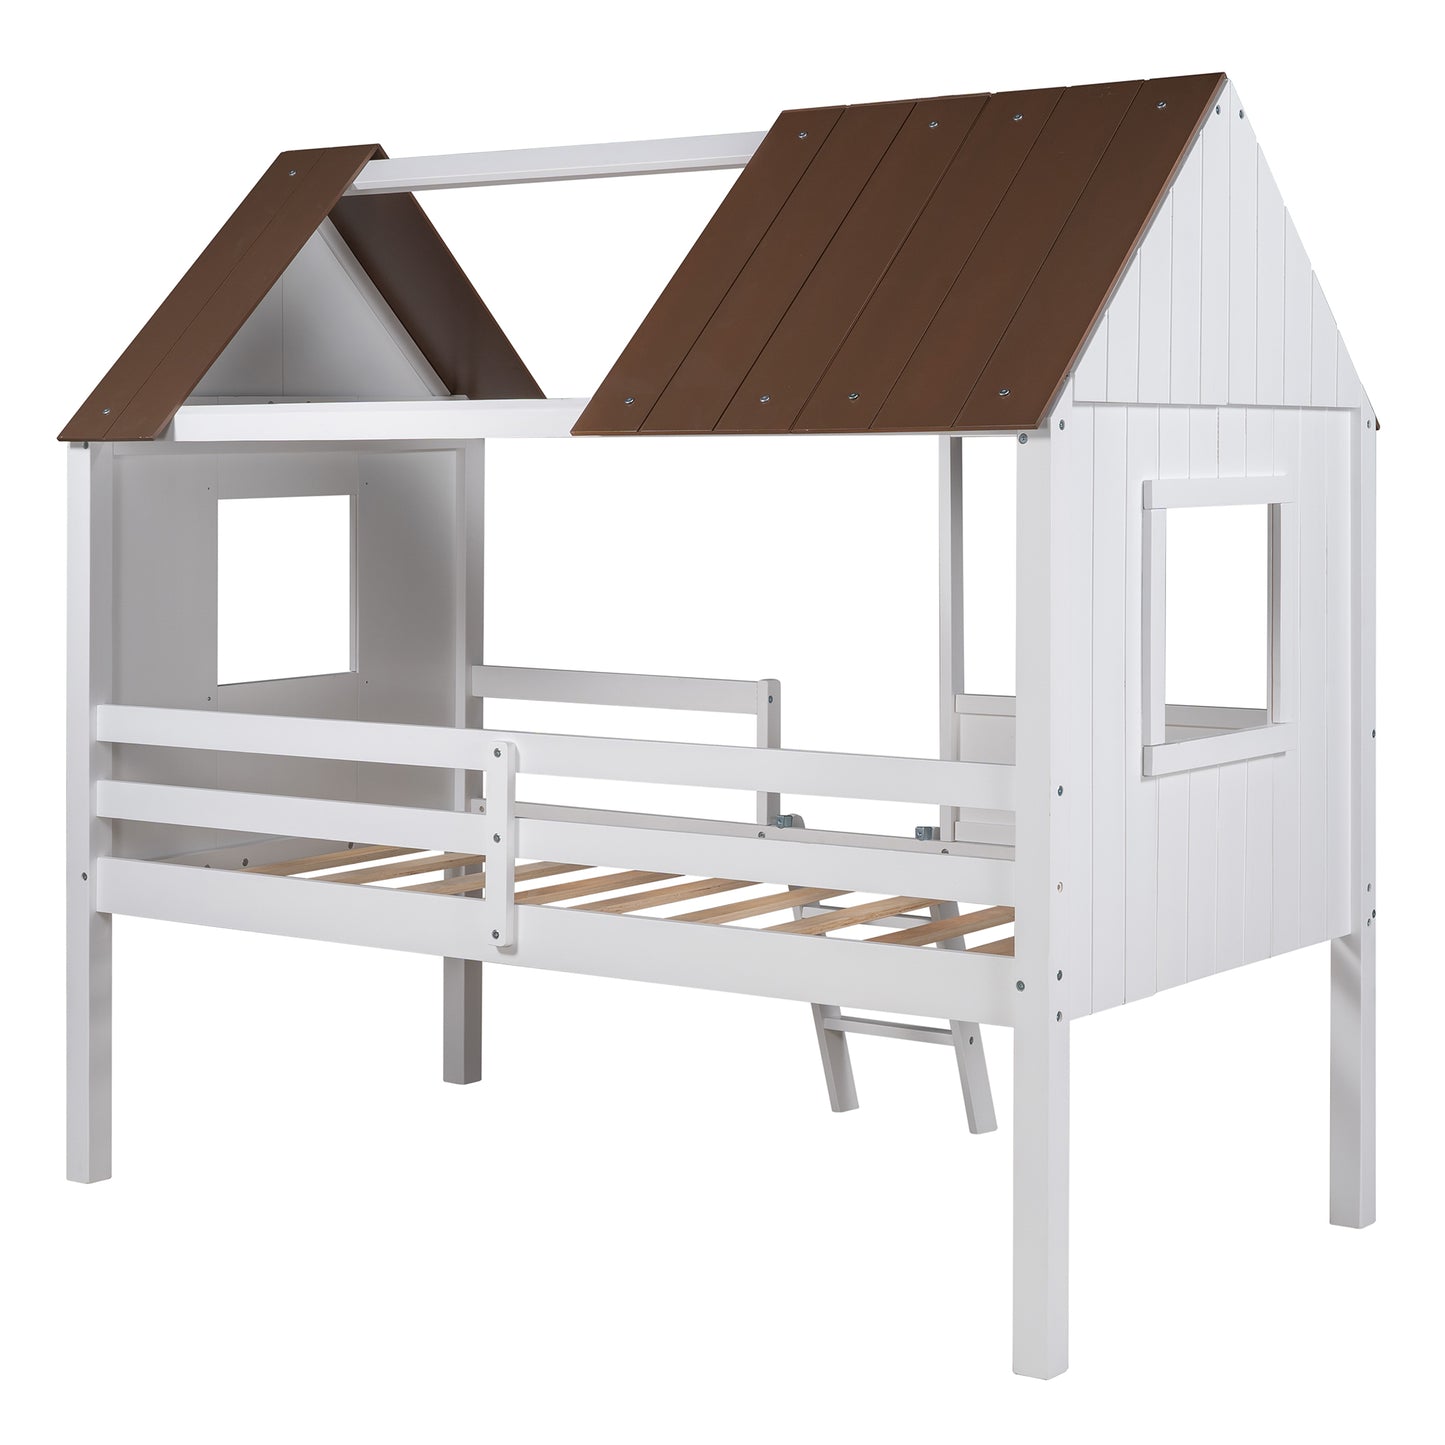 Twin Size Low Loft Wood House Bed with Two Side Windows, for Kids, Teens, Girls, Boys, (Antique Gray+Normal White)